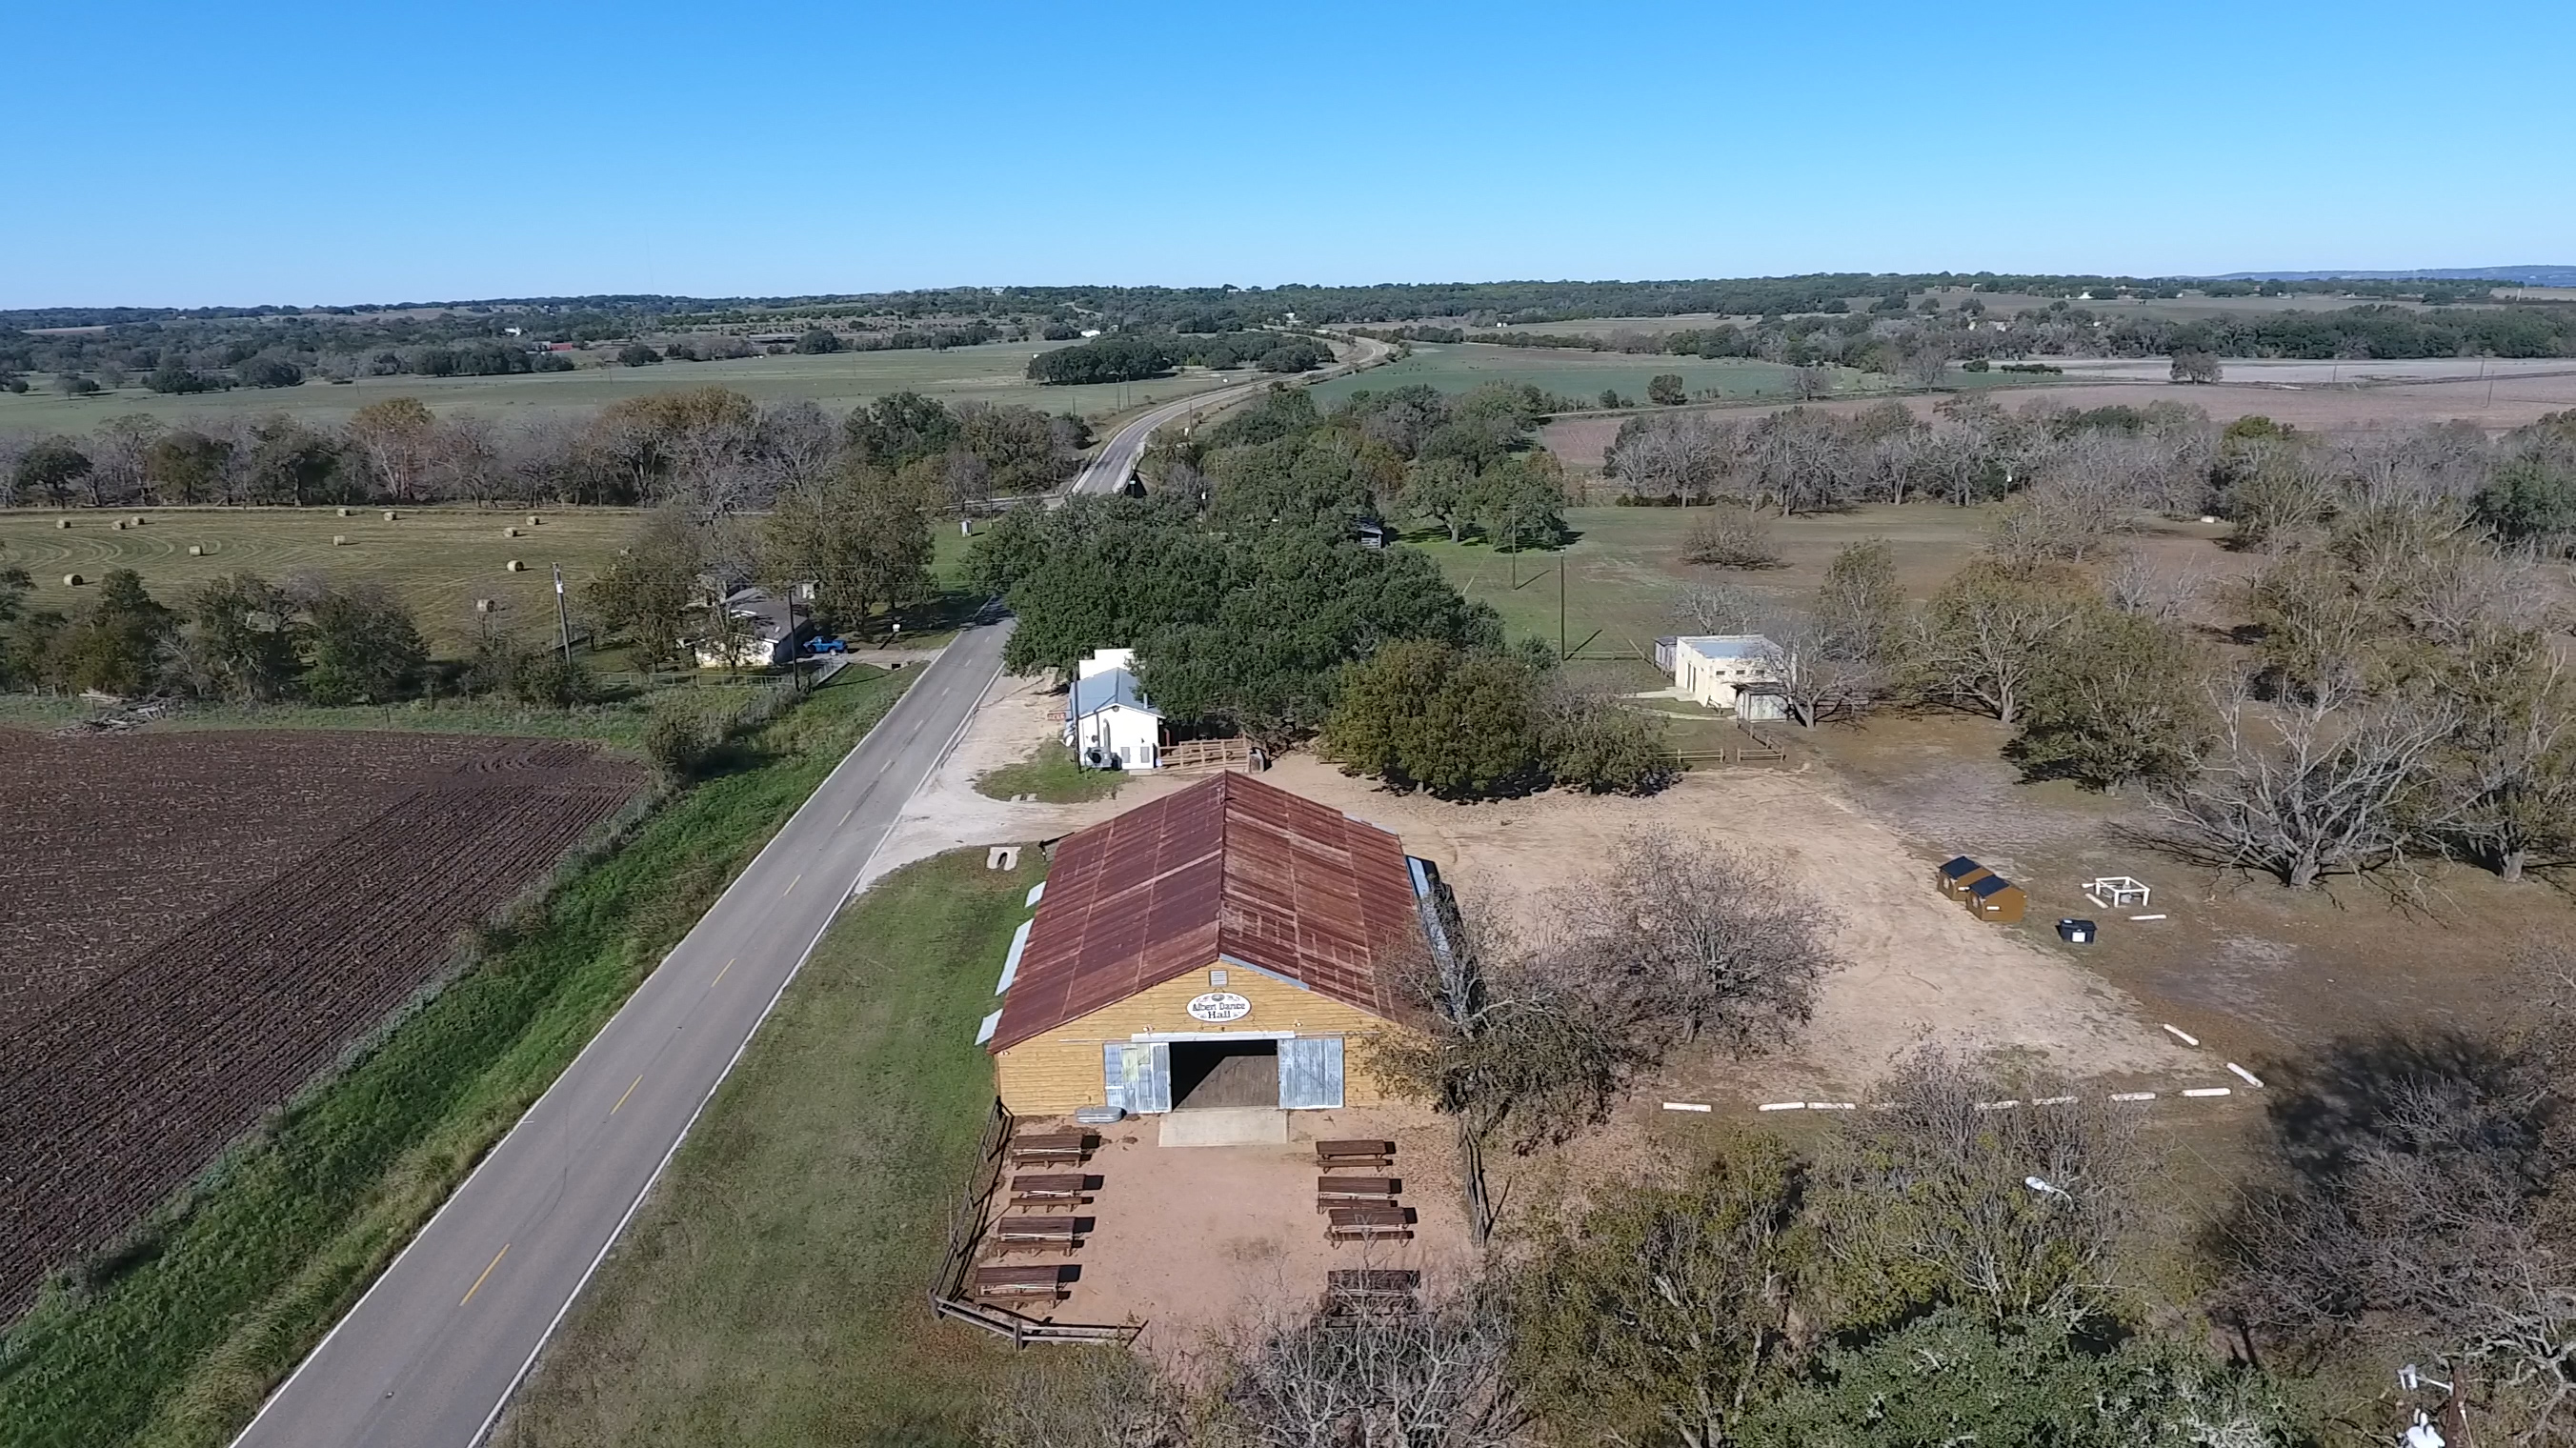 Albert Texas Town for sale Picture Gallery